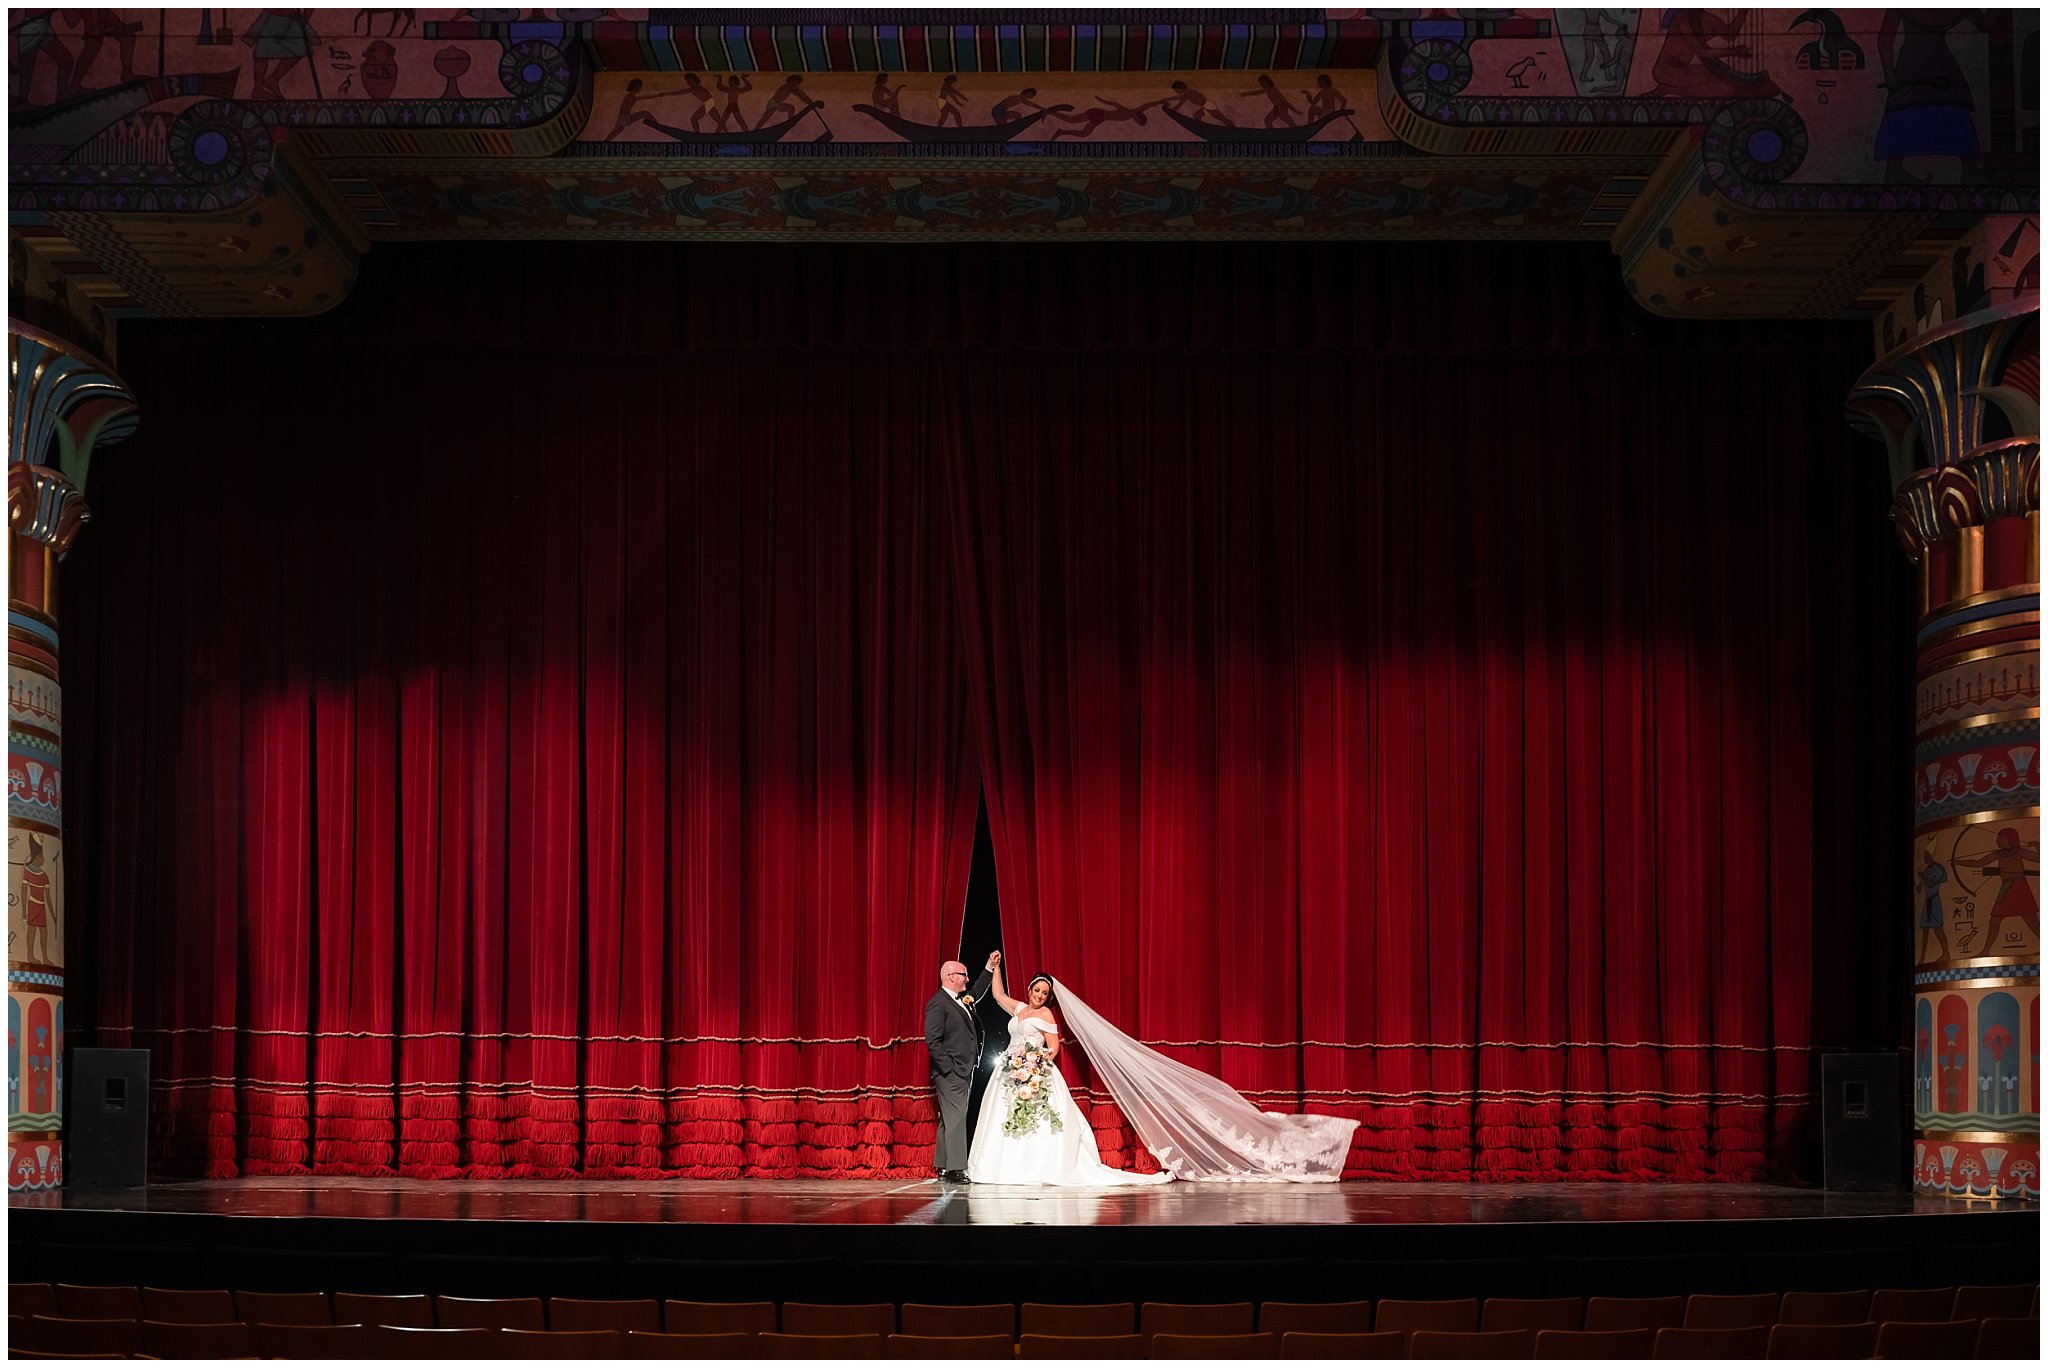 Bride and groom portrait in a theater | Broadway Musical Theatre Wedding